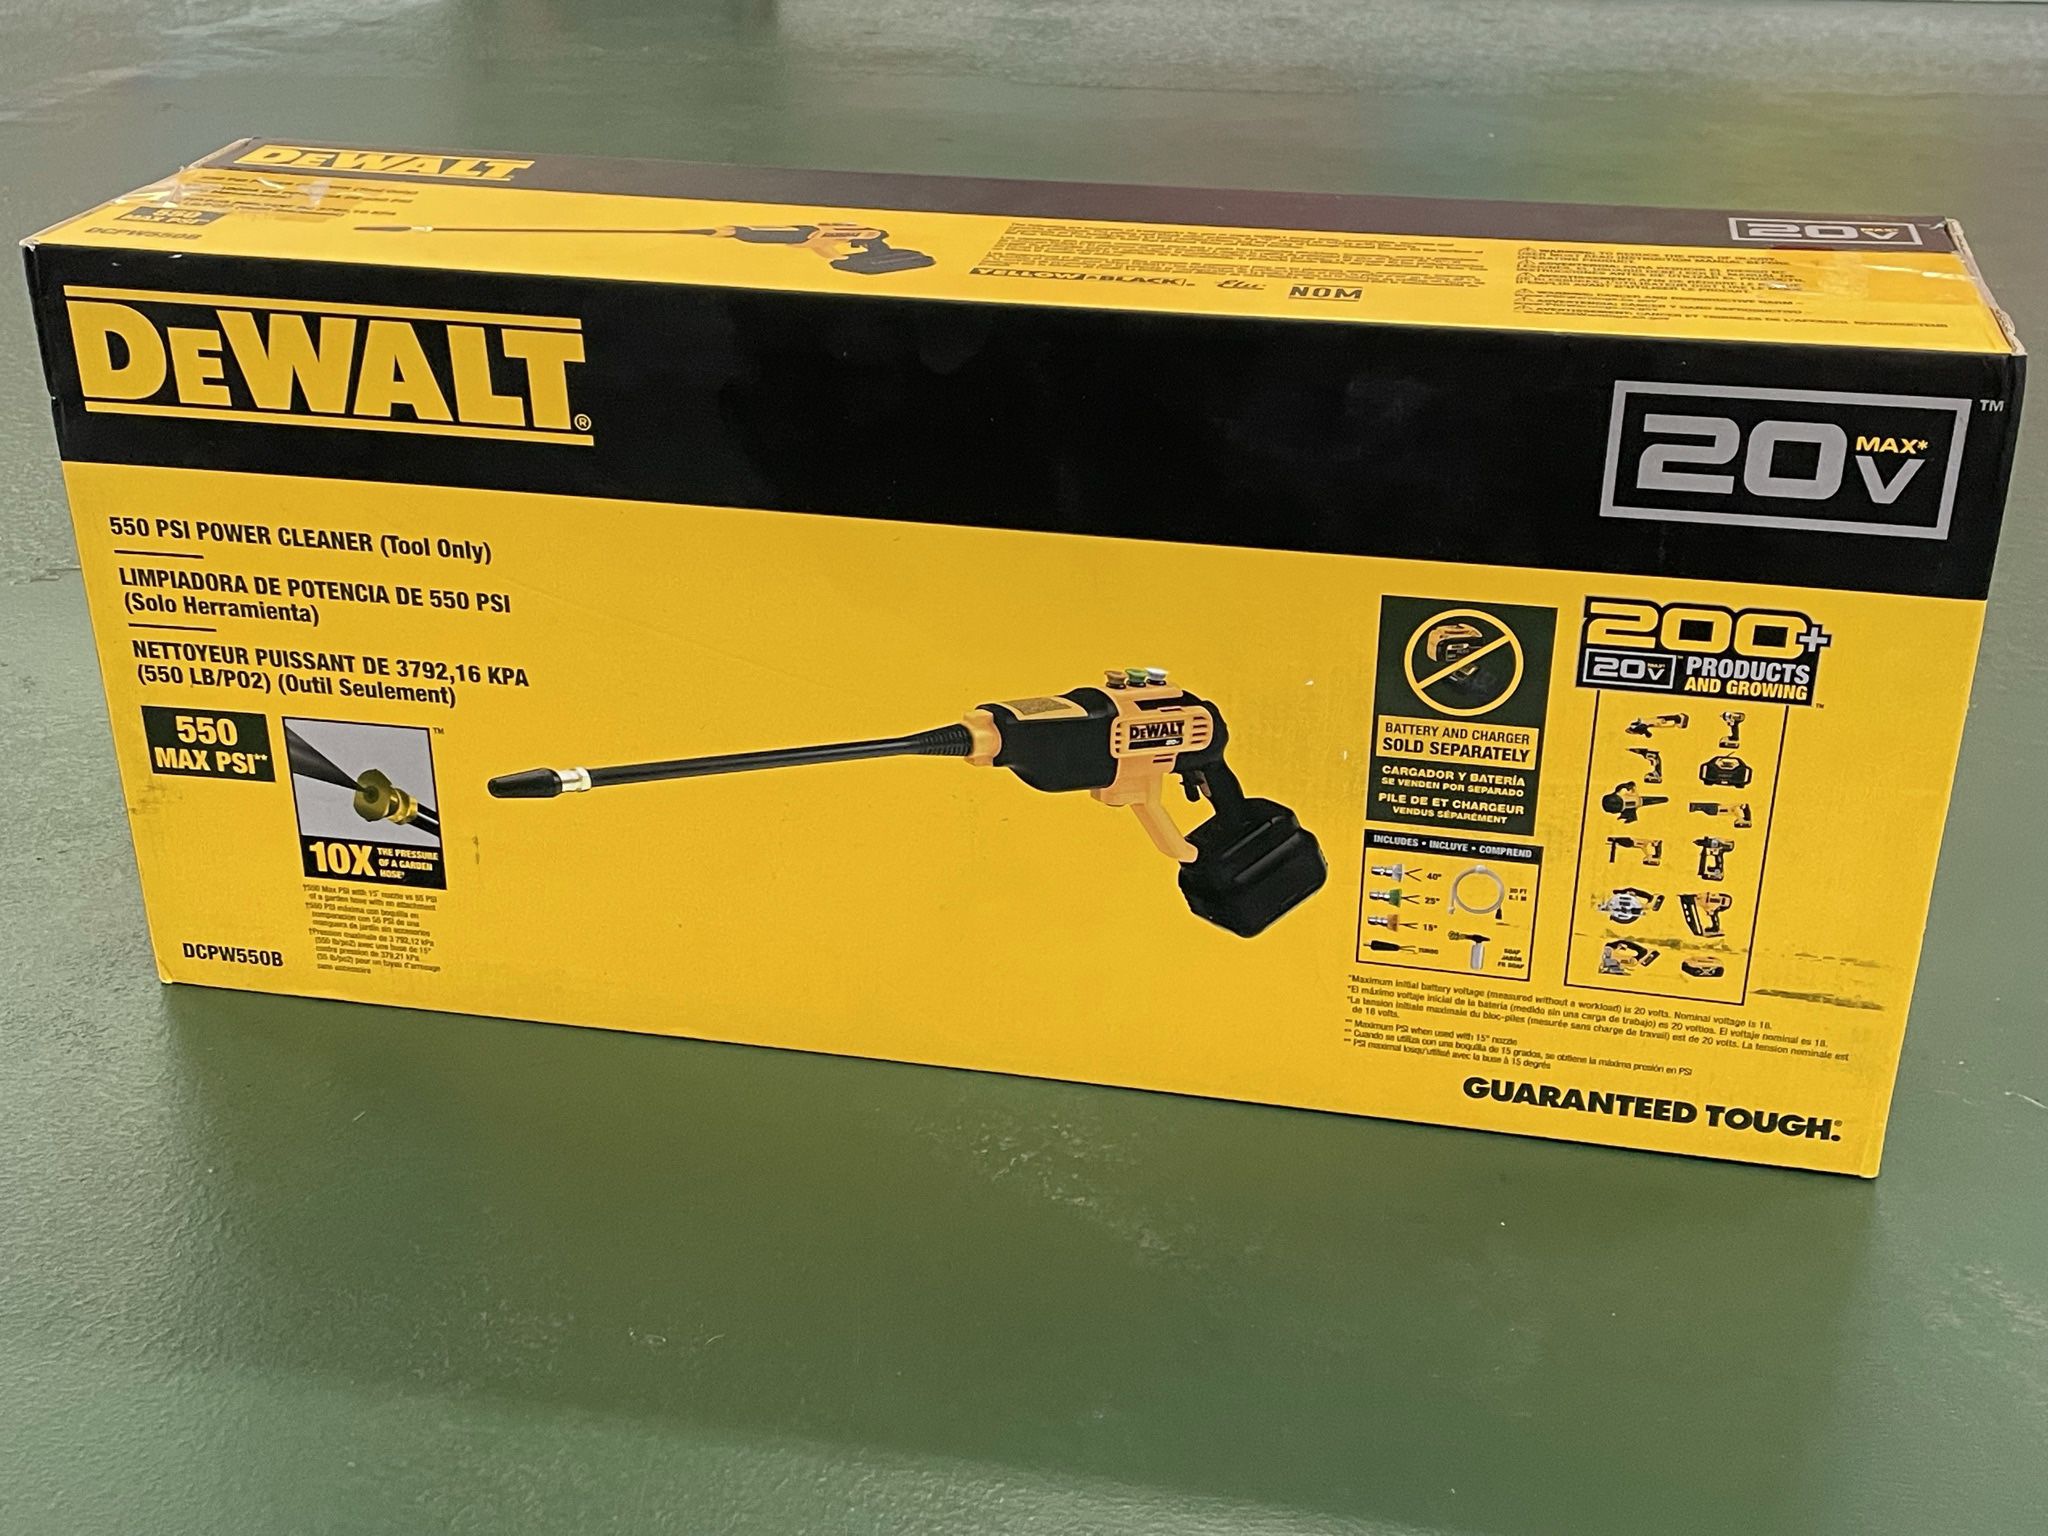 NEW! DeWalt DCPW550B 20V MAX 550 PSI Power Cleaner (Tool Only)